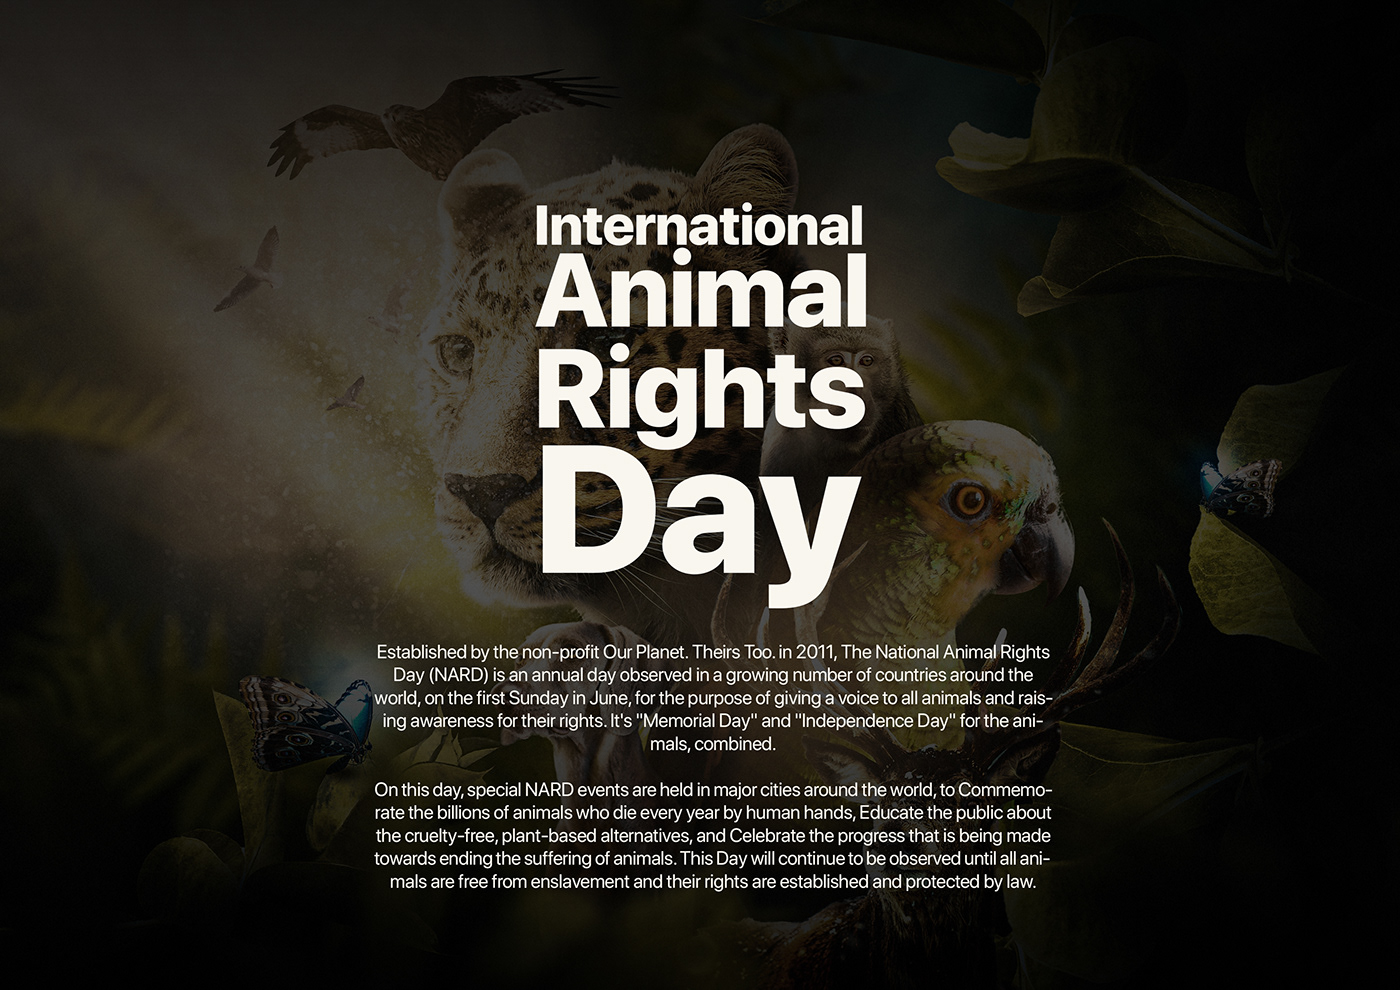 Animal rights day | Behance